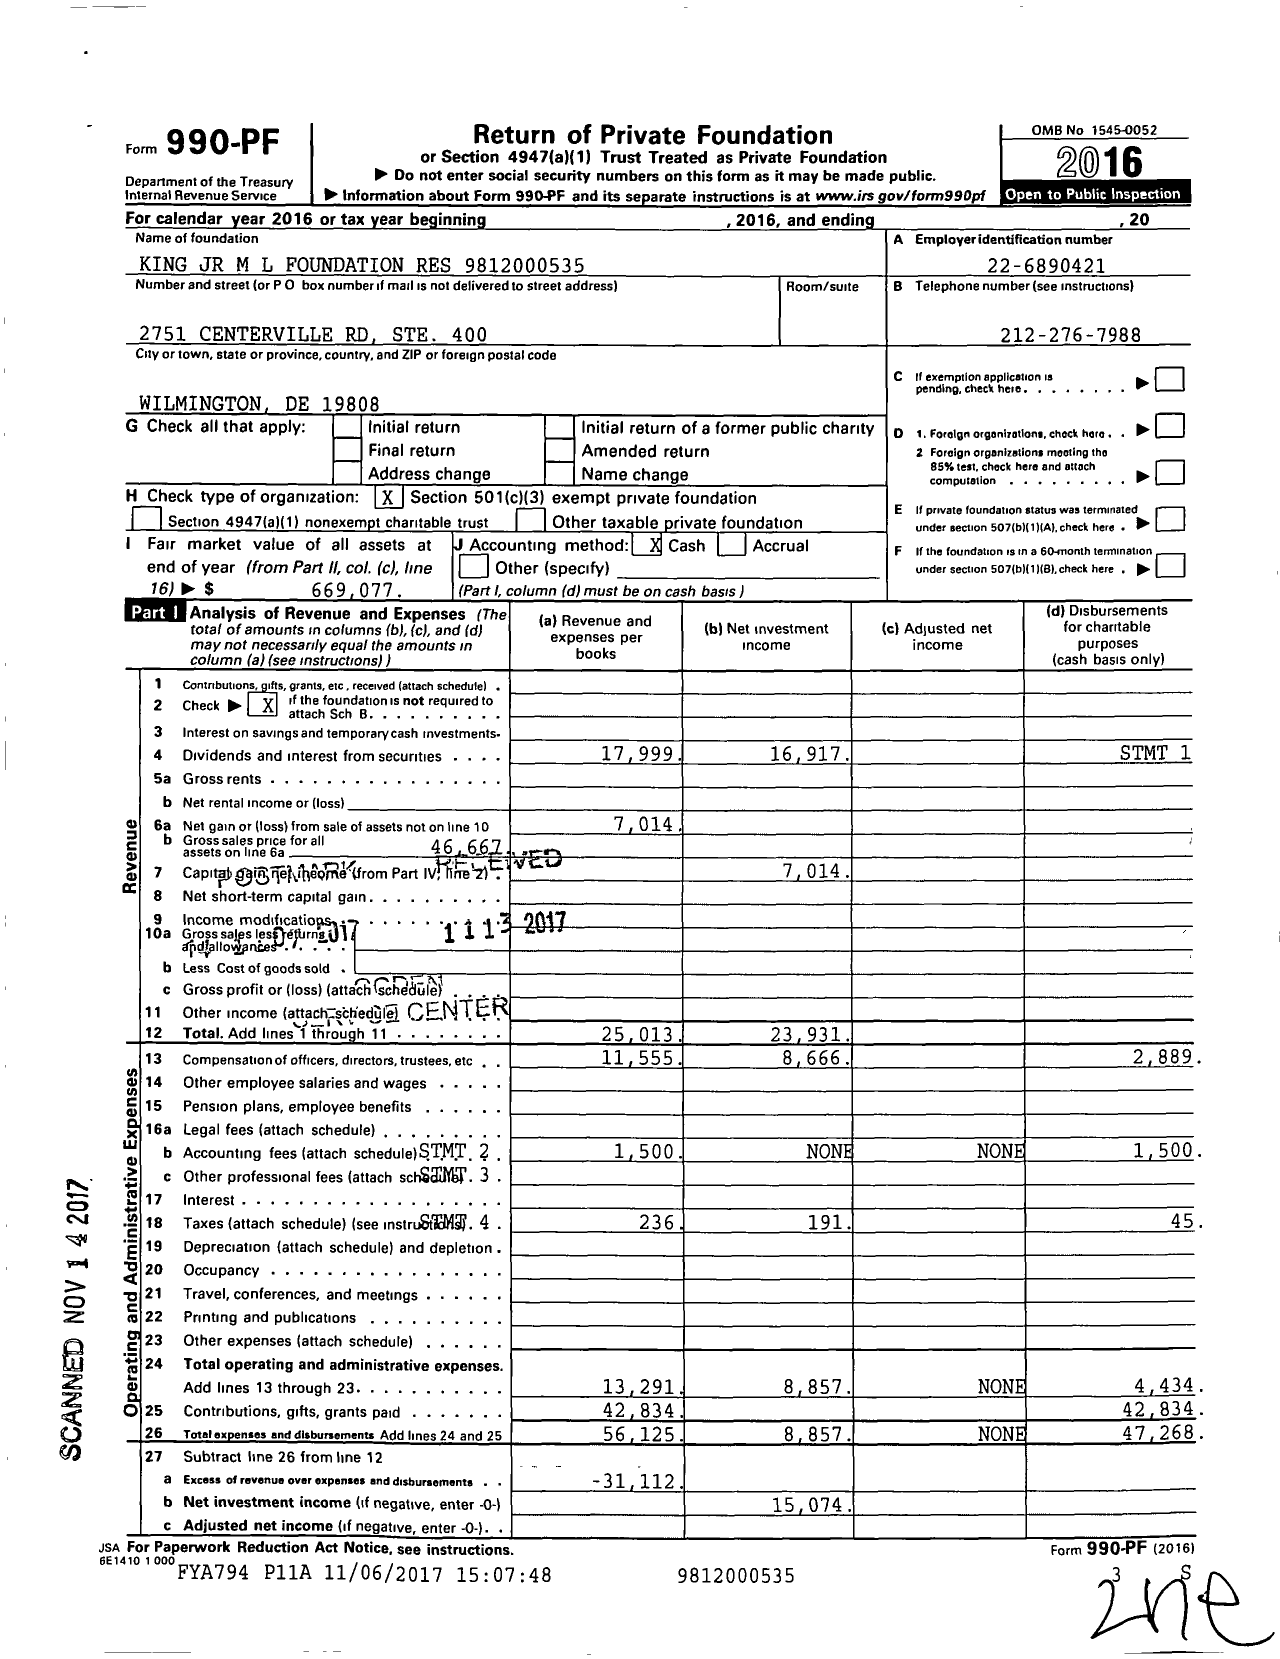 Image of first page of 2016 Form 990PF for King JR M L Foundation Res